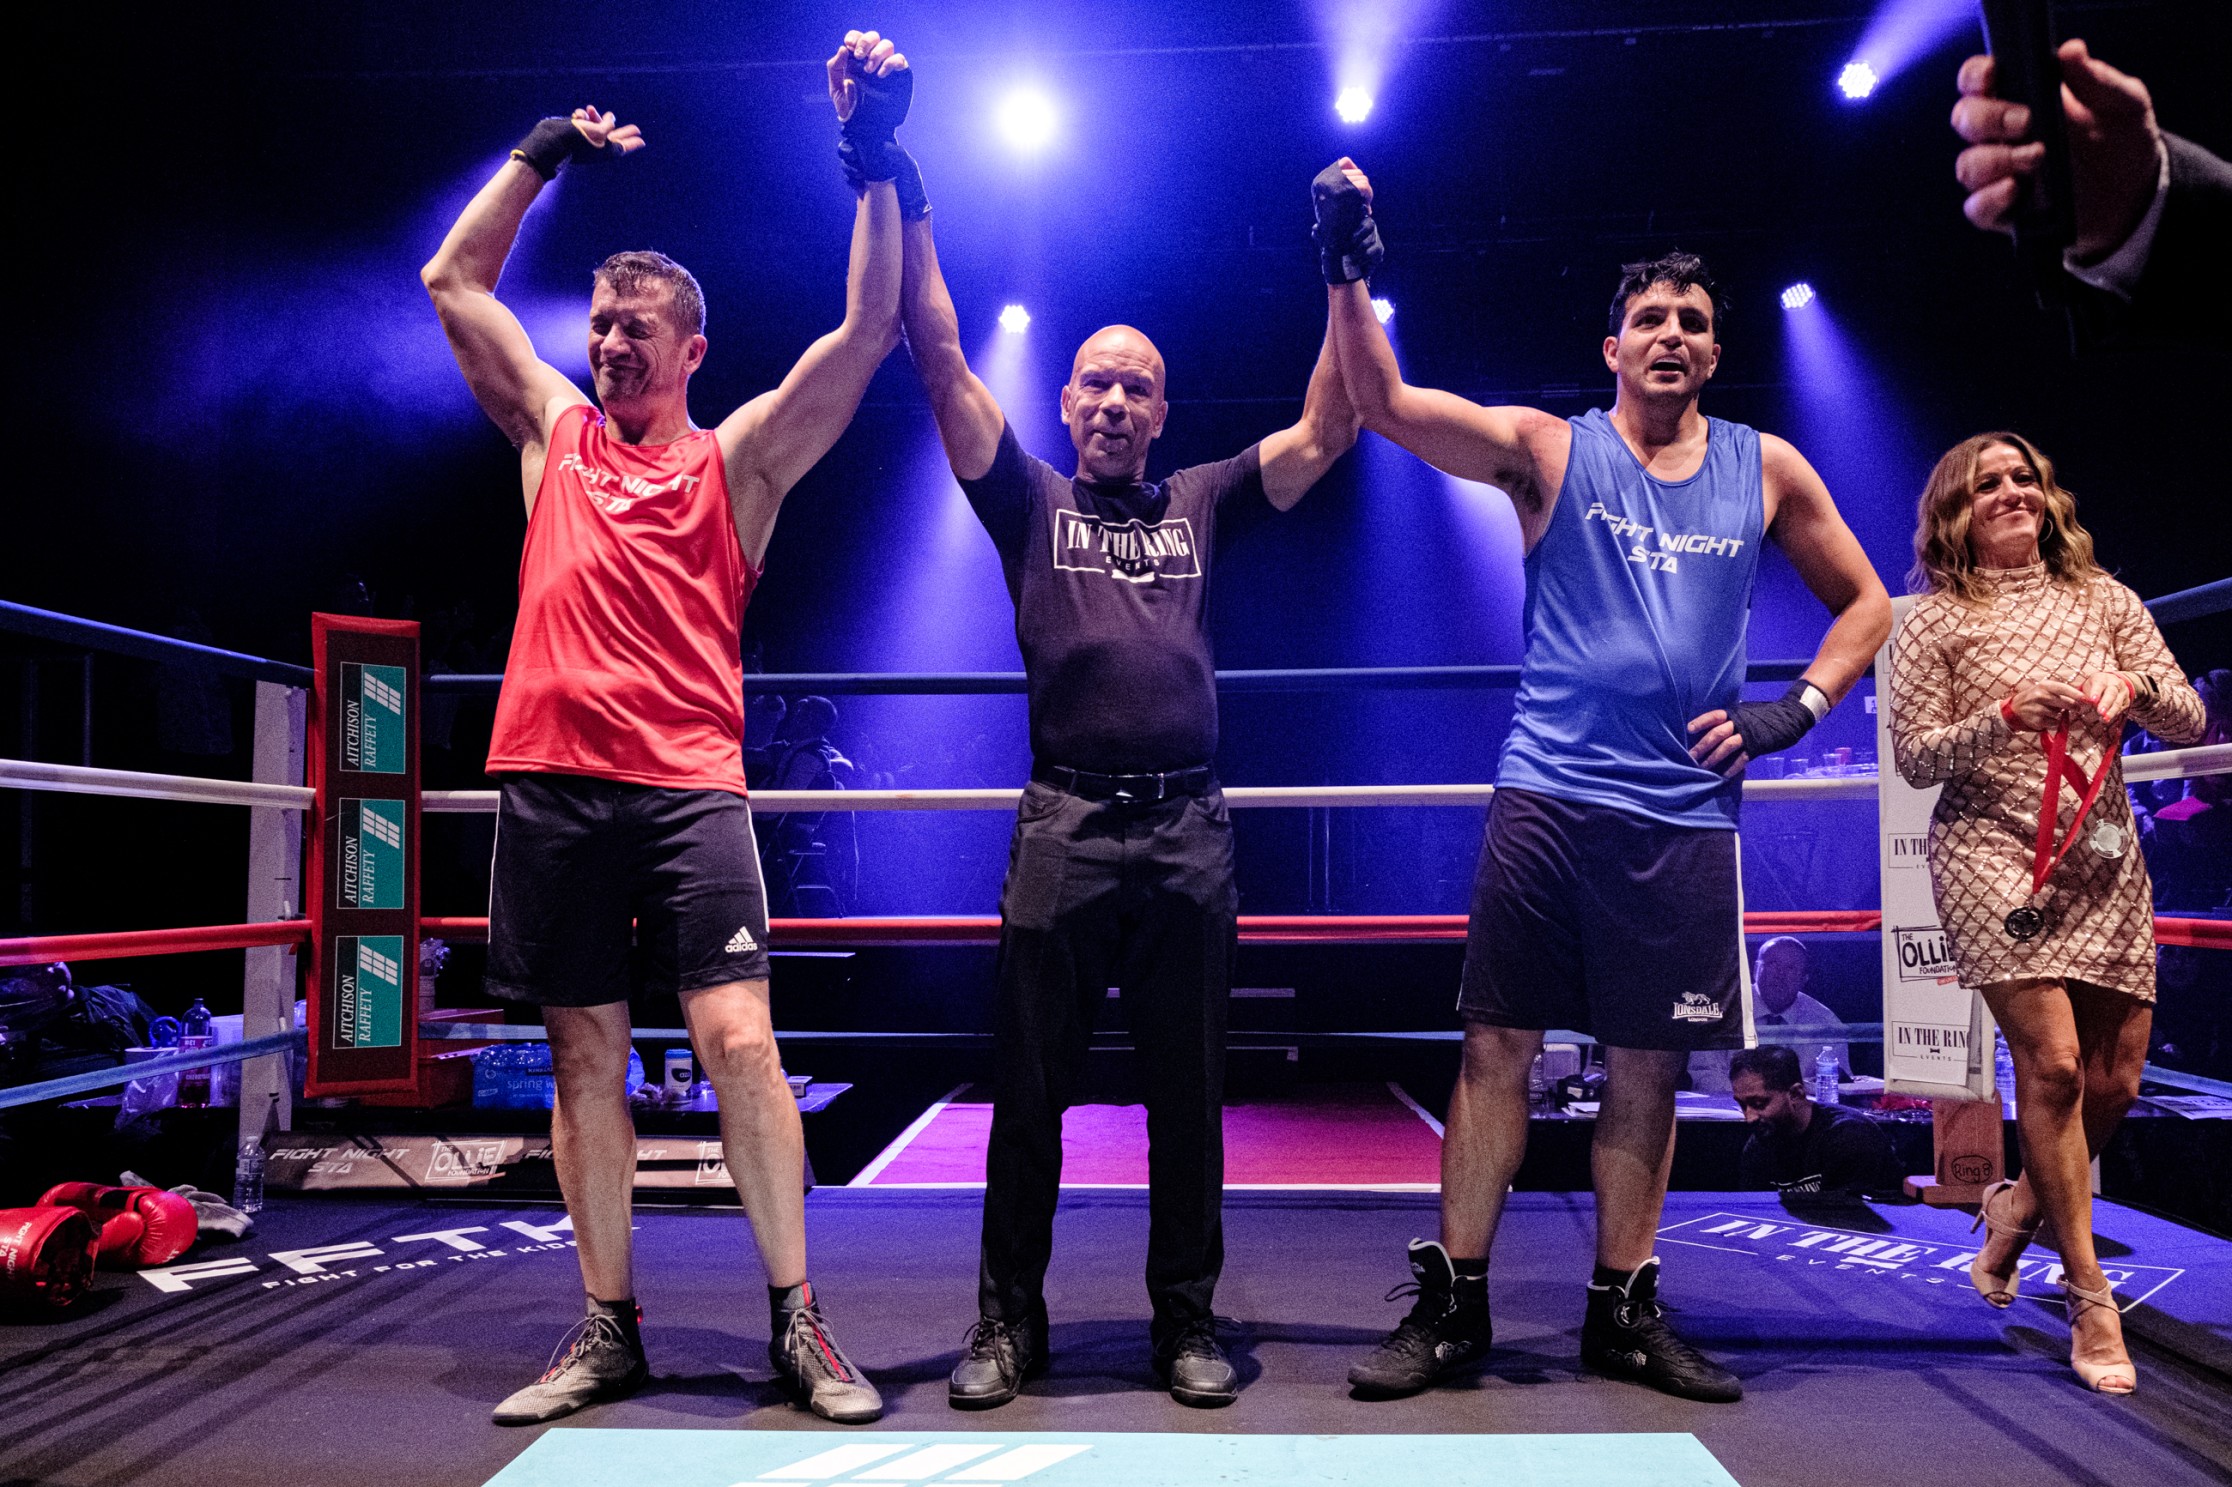 Inciper employee helps raise £10k for OLLIE Foundation with charity boxing match